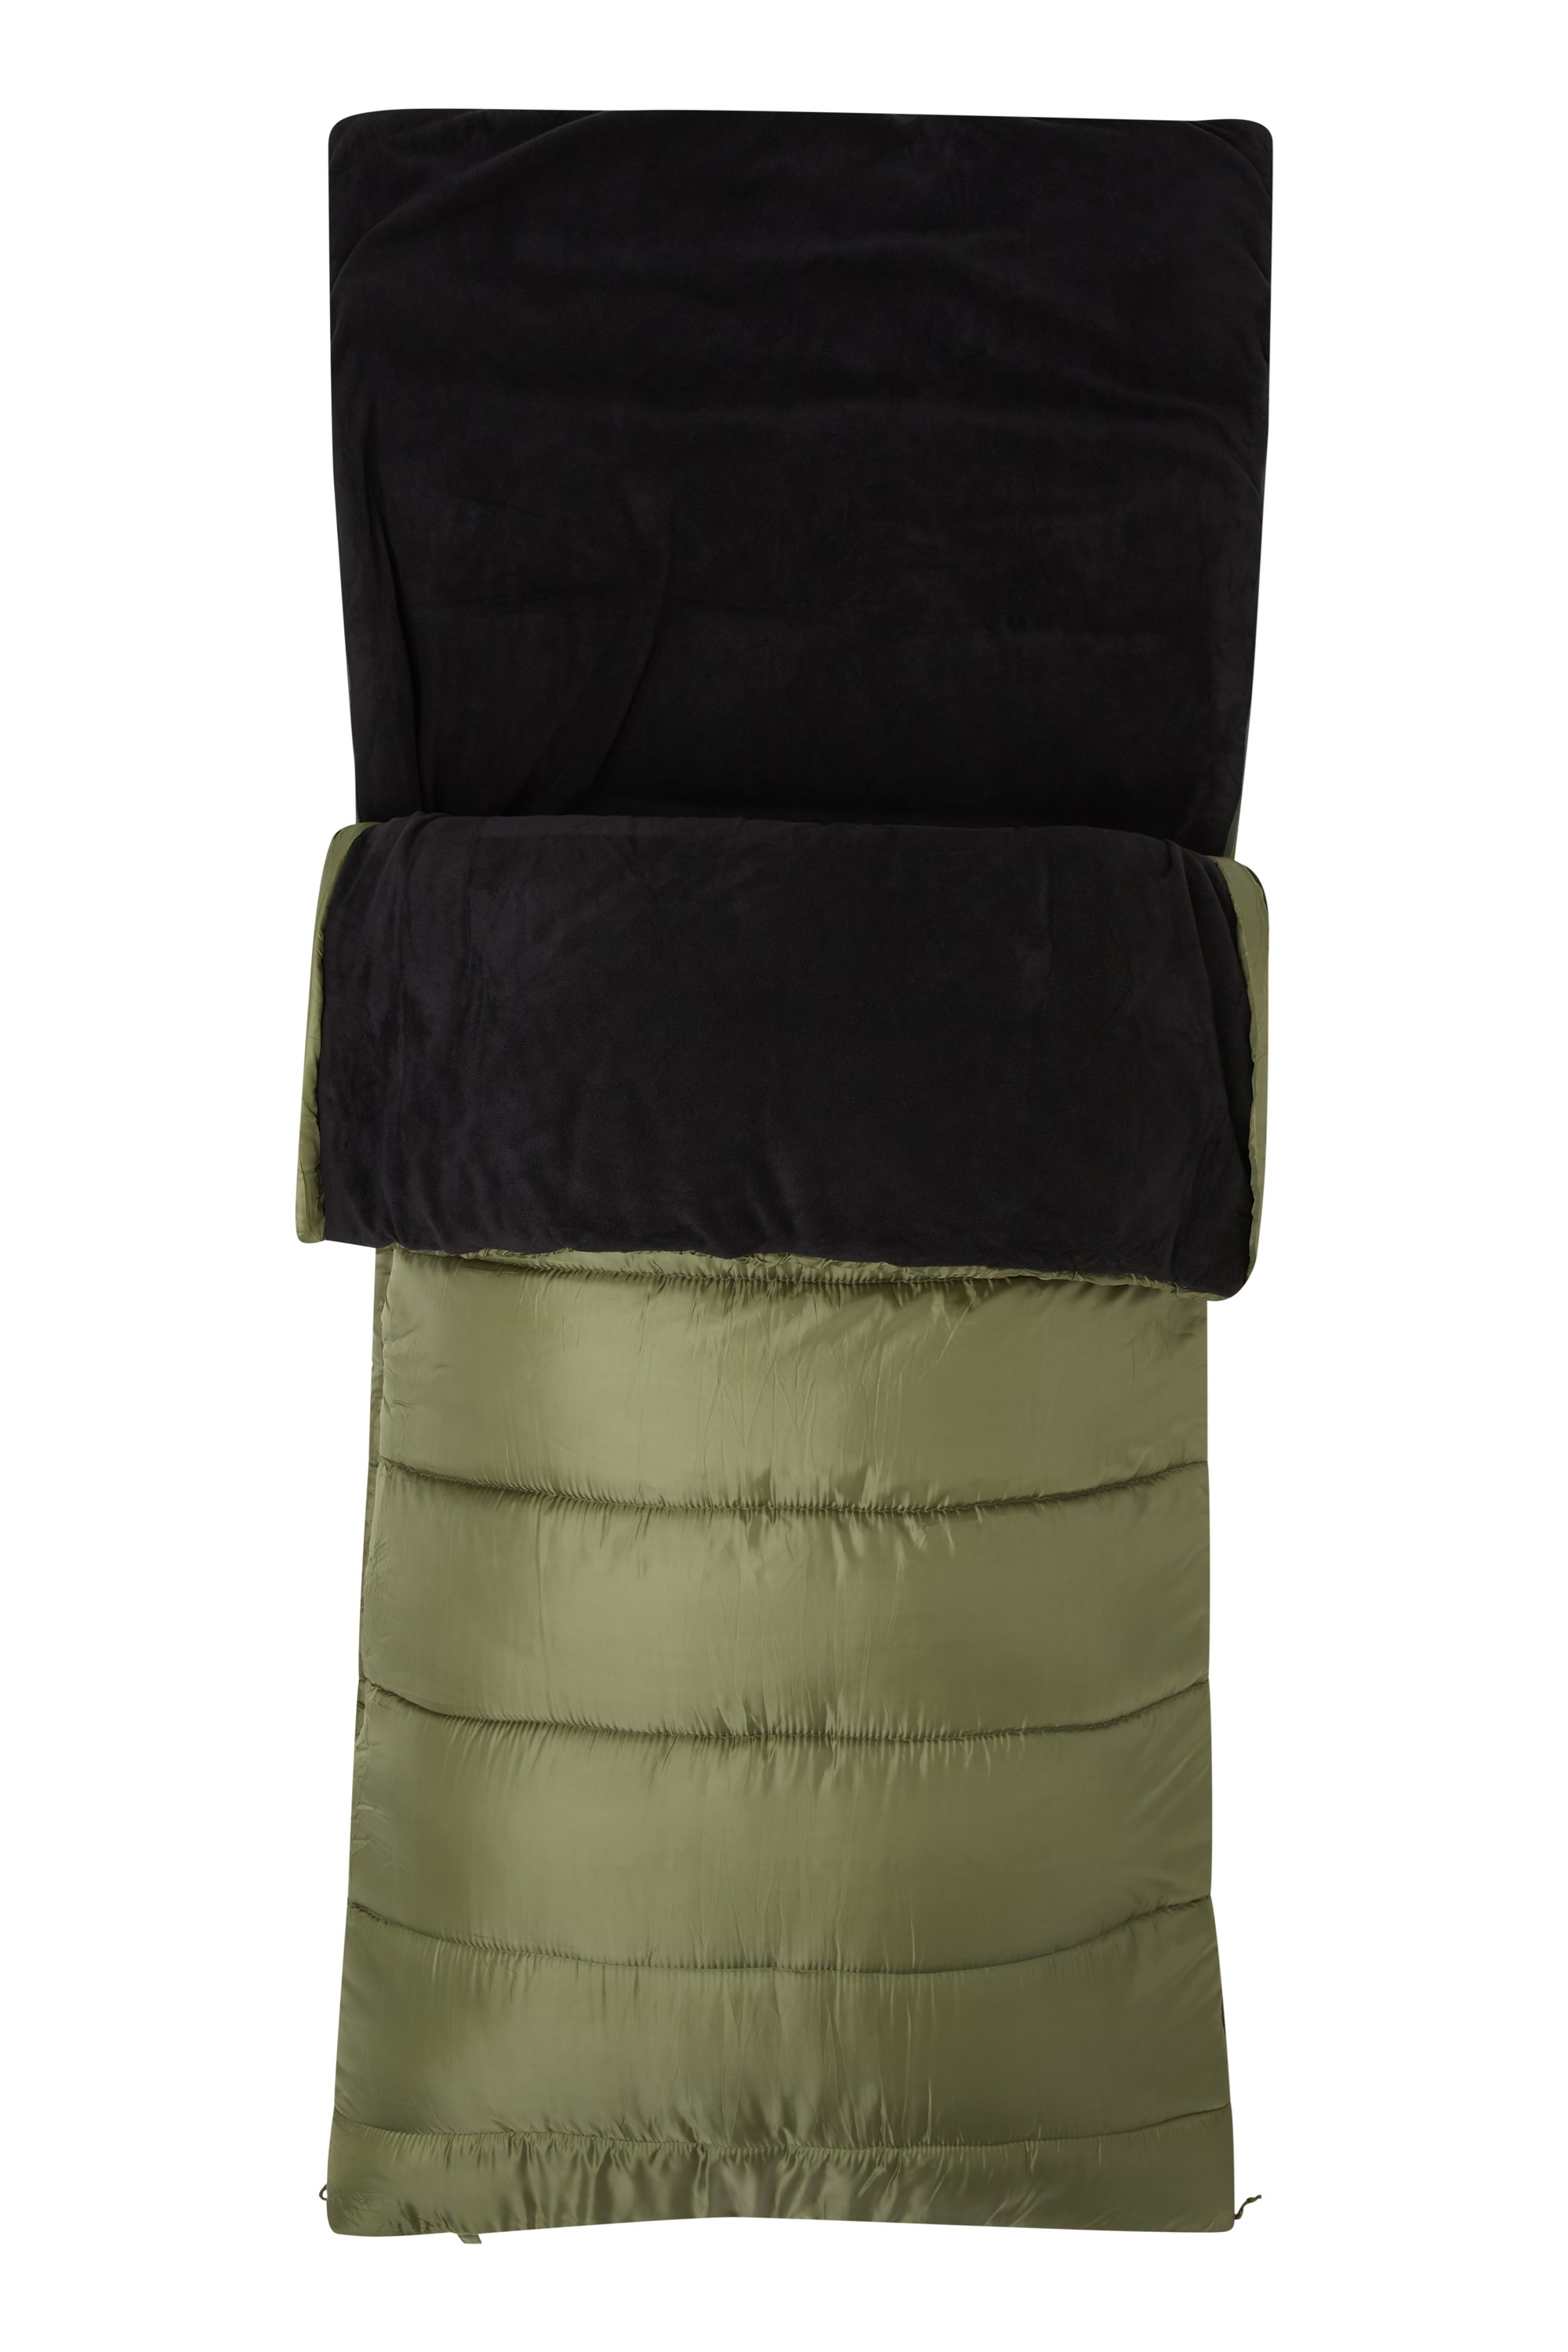 Mountain Warehouse Sutherland Sleeping Bag in Khaki with Two Way Zipper-One Size 